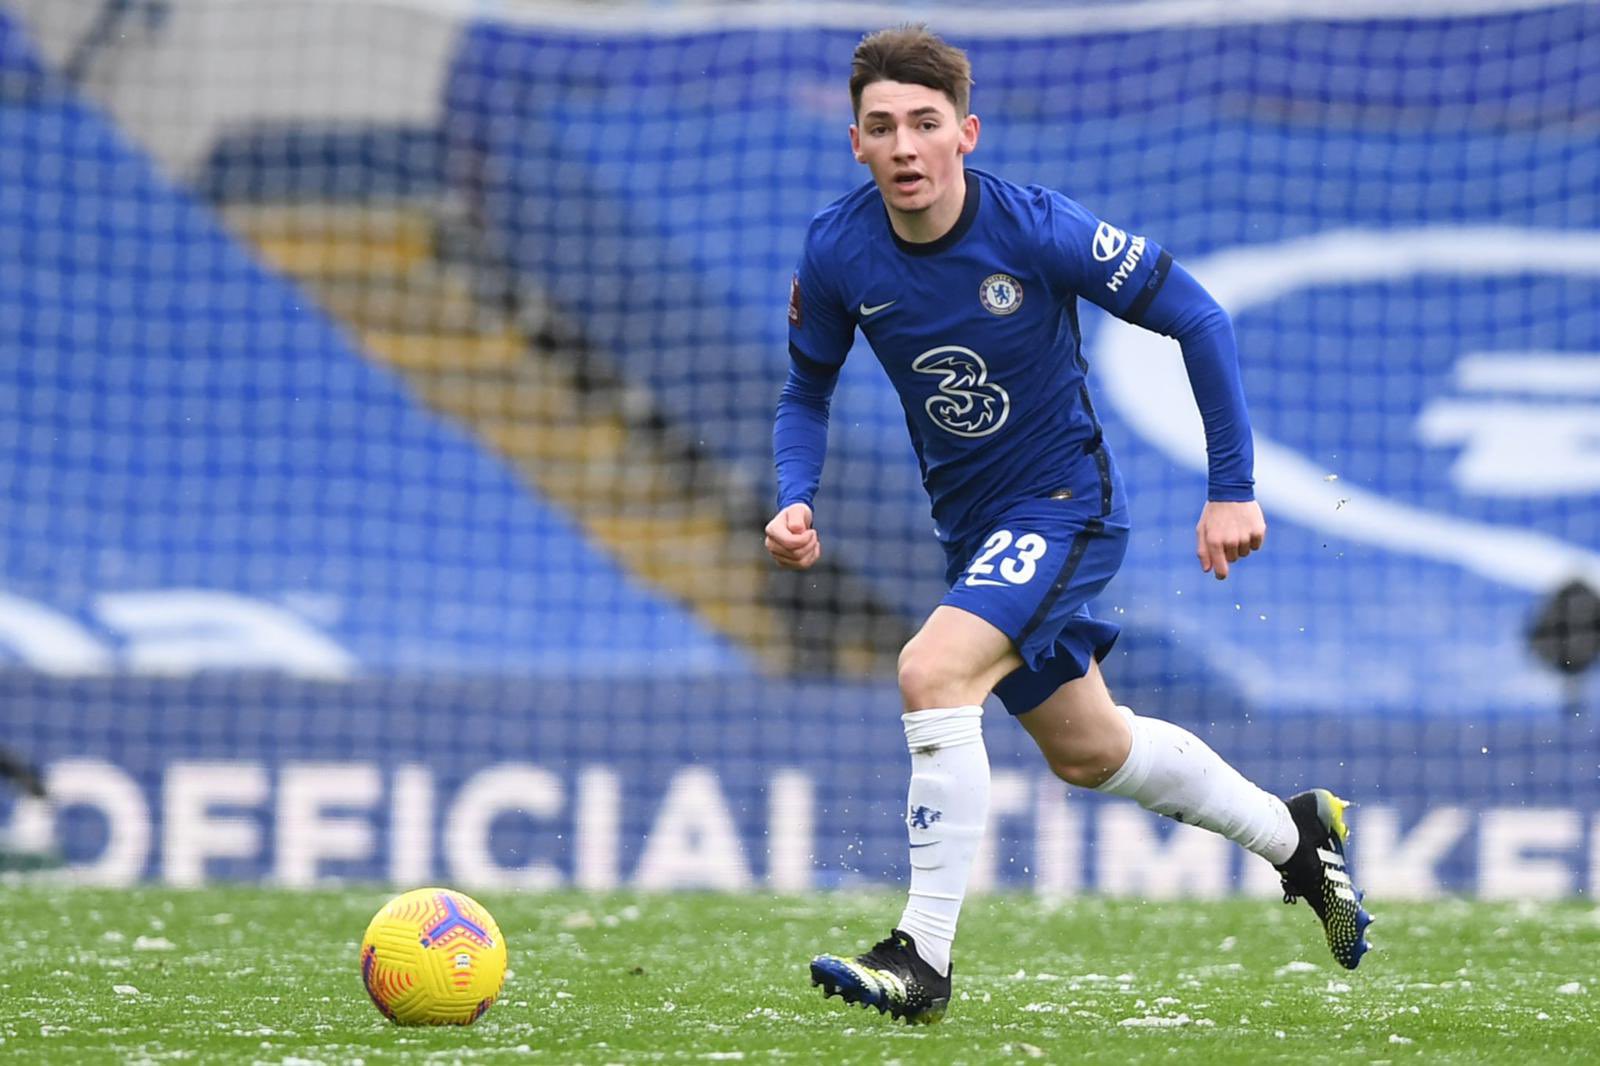 BILLY GILMOUR DESTINED FOR GREATNESS